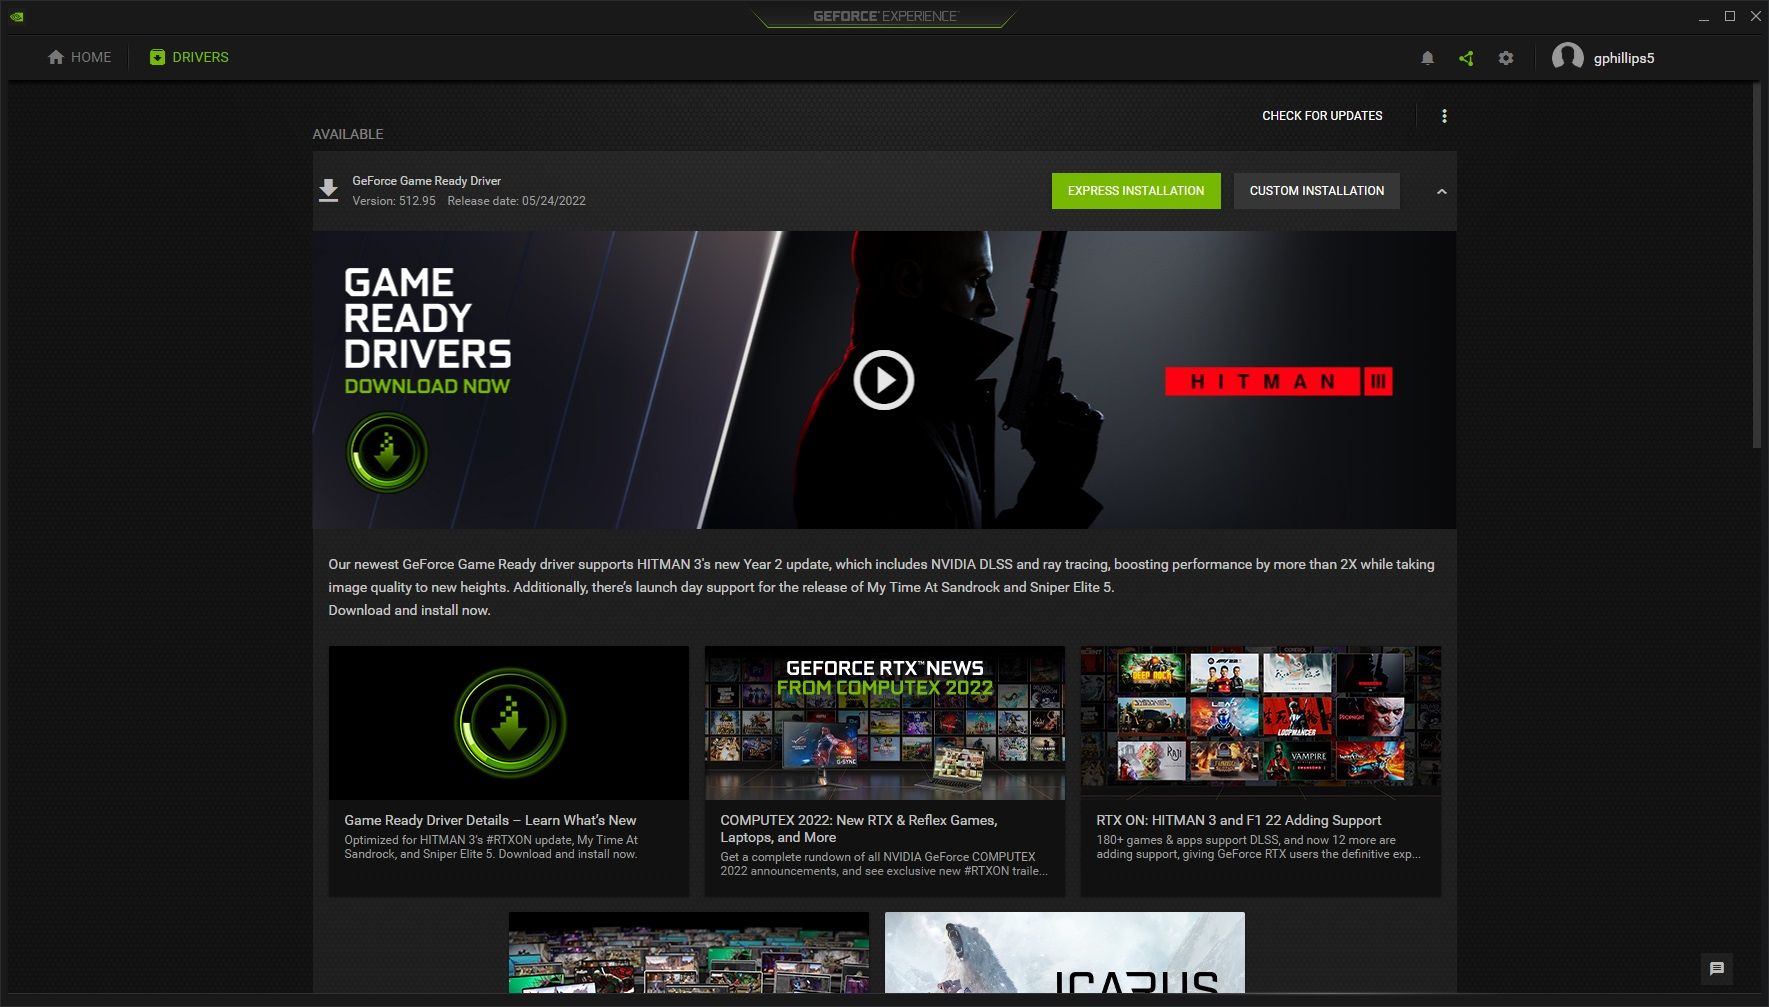 nvidia geforce experience update drivers